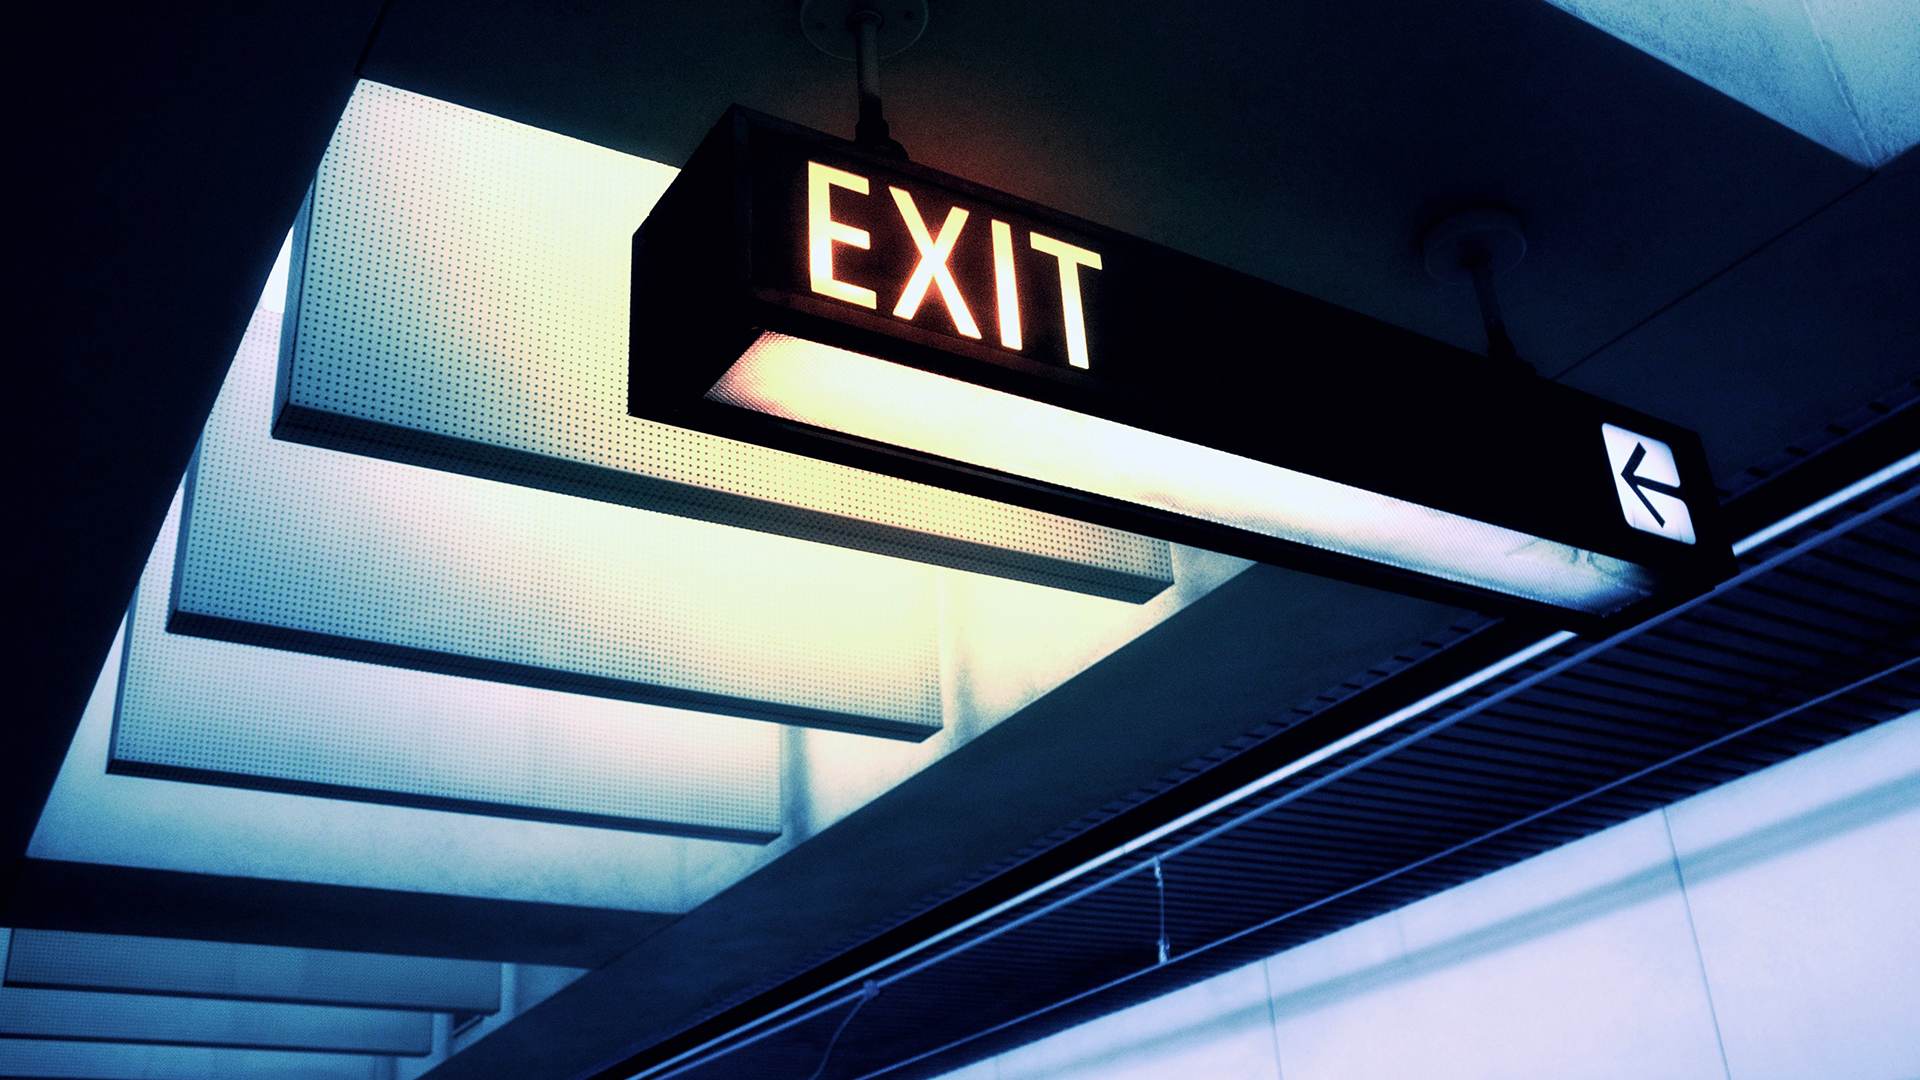 General 1920x1080 exit lights signboard 